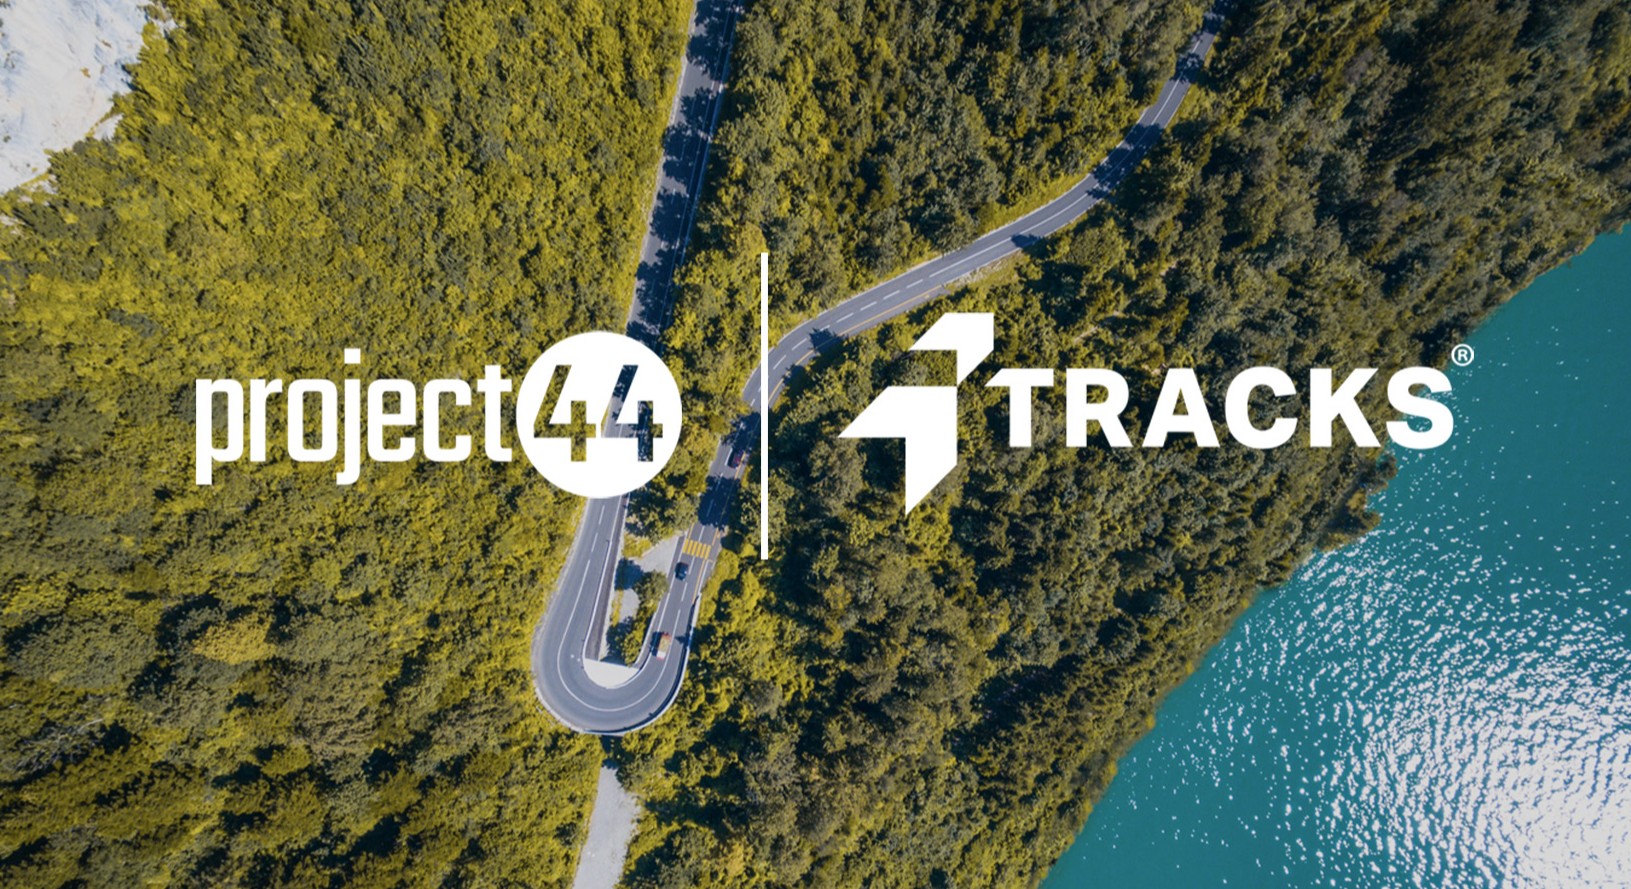 Tracks announces partnership with project44 to help make supply chains more sustainable